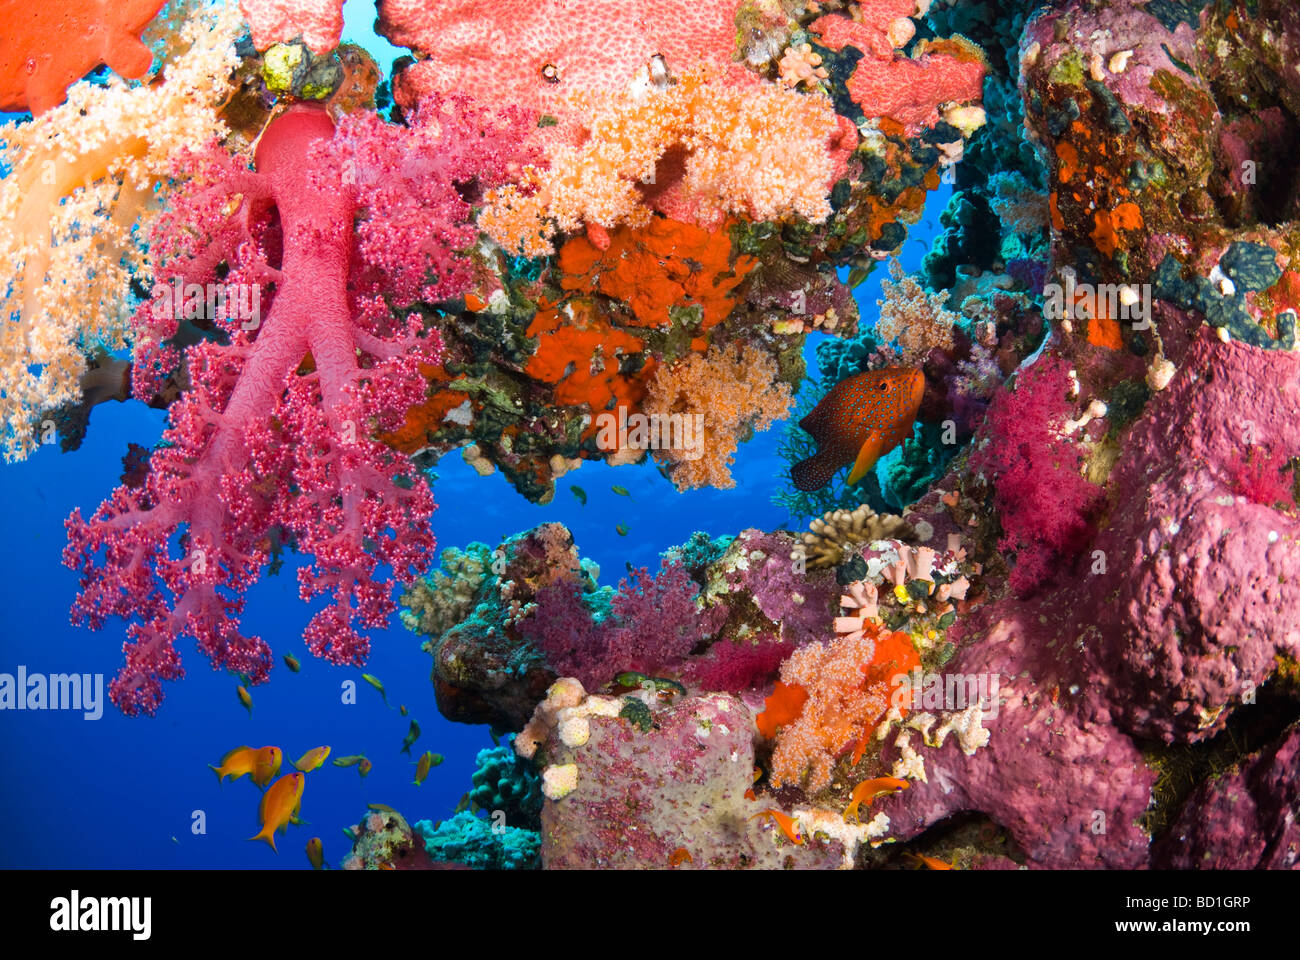 Colorful coral reef scene with purple soft corals and various tropical fish. Safaga, Red Sea Stock Photo